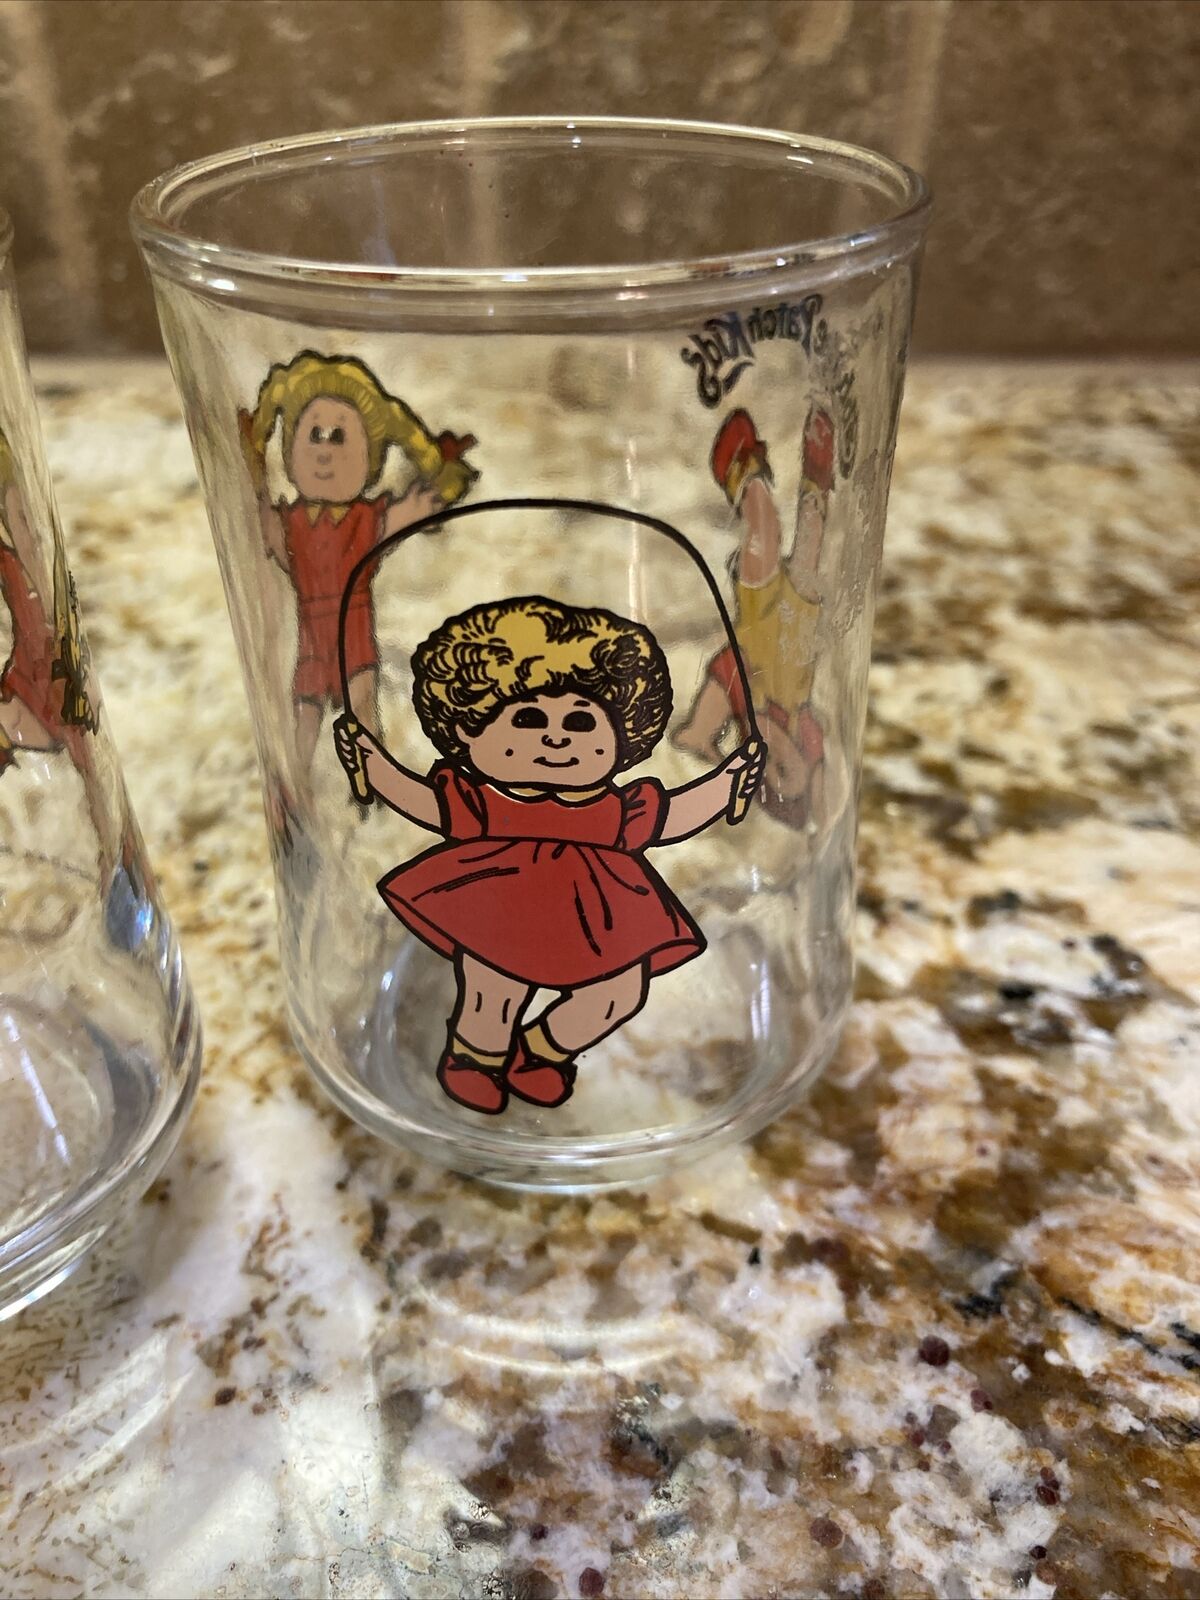 3 Vintage Cabbage Patch Kids Juice Glasses From 1984 Absolutely Adorable